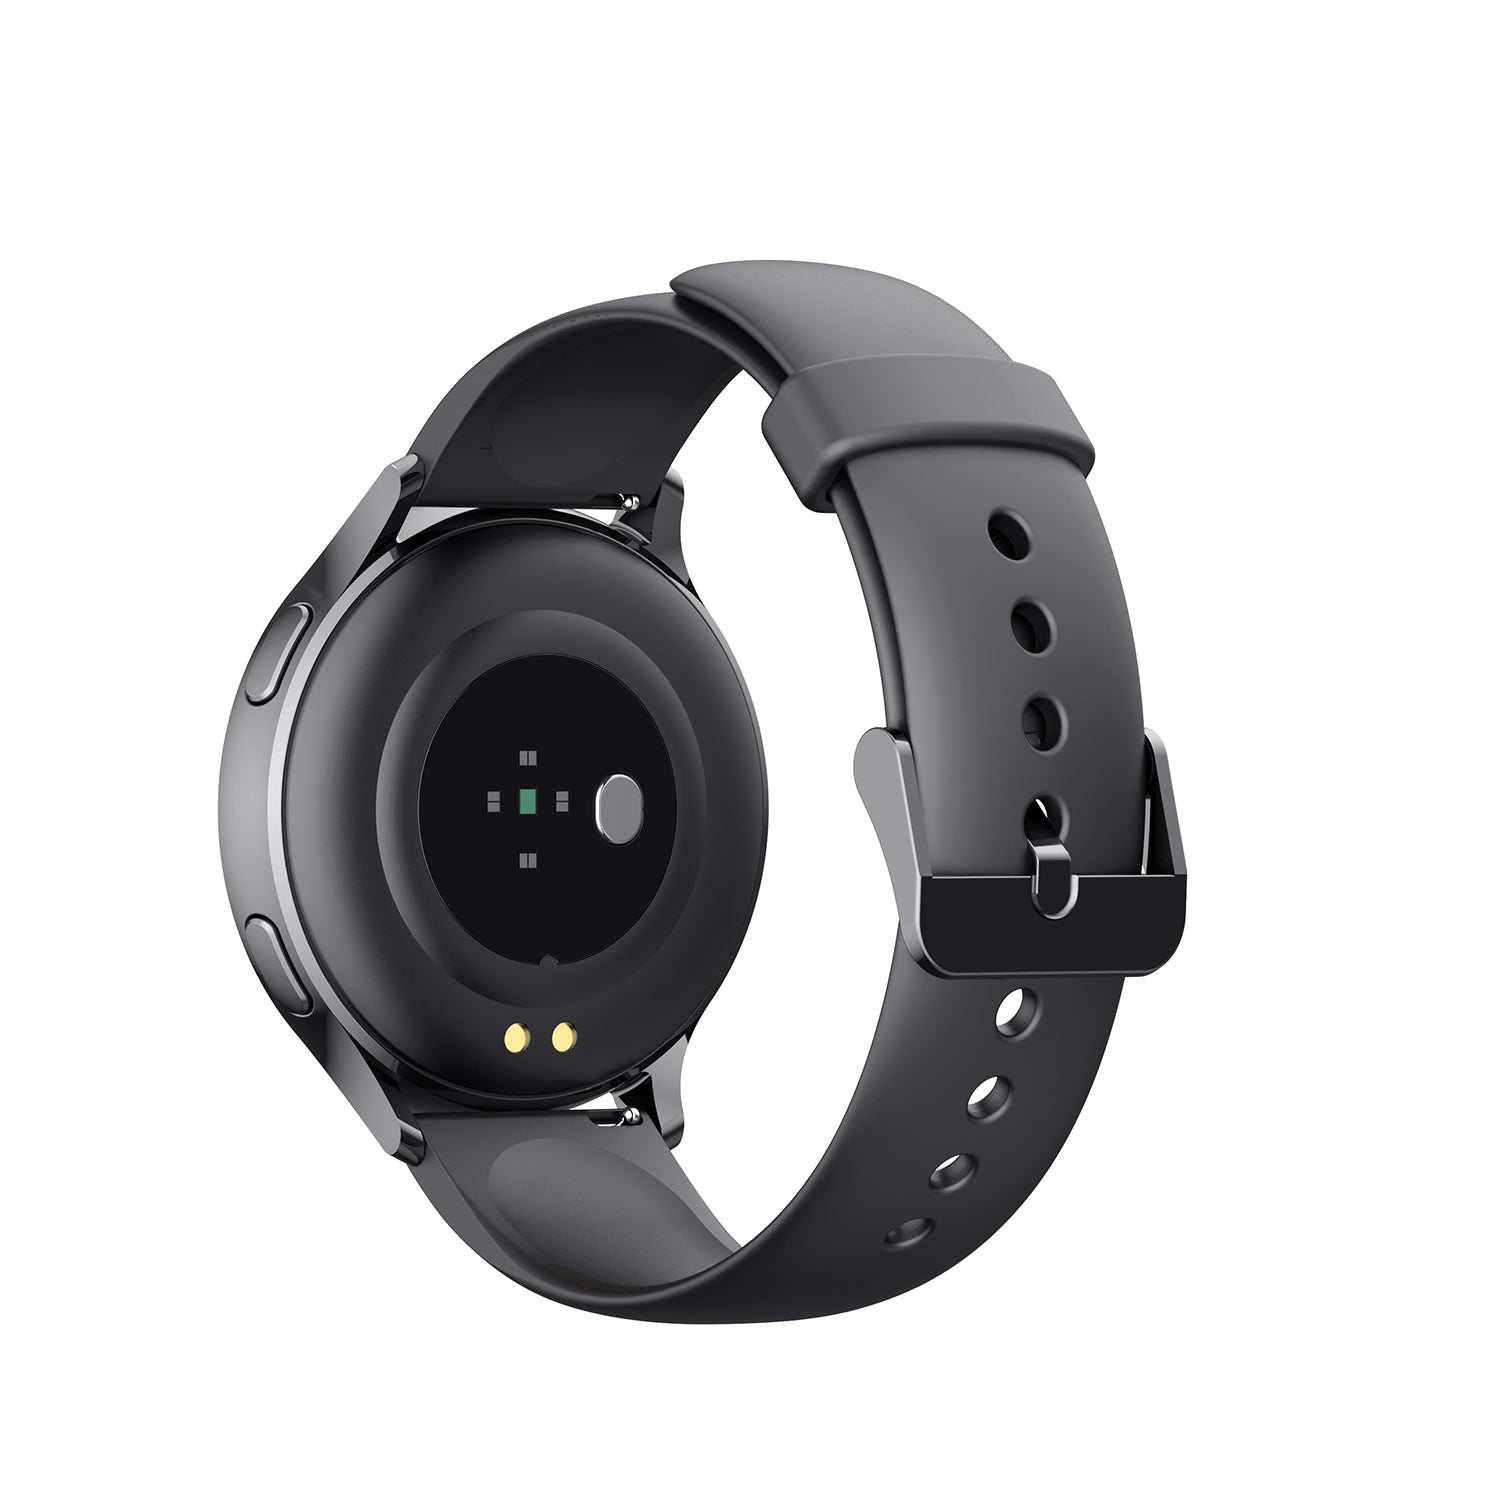 HAVIT M9023 Ultra-thin Smart Watch with 23 Sport Modes & Blood Pressure Body Temperature Monitoring